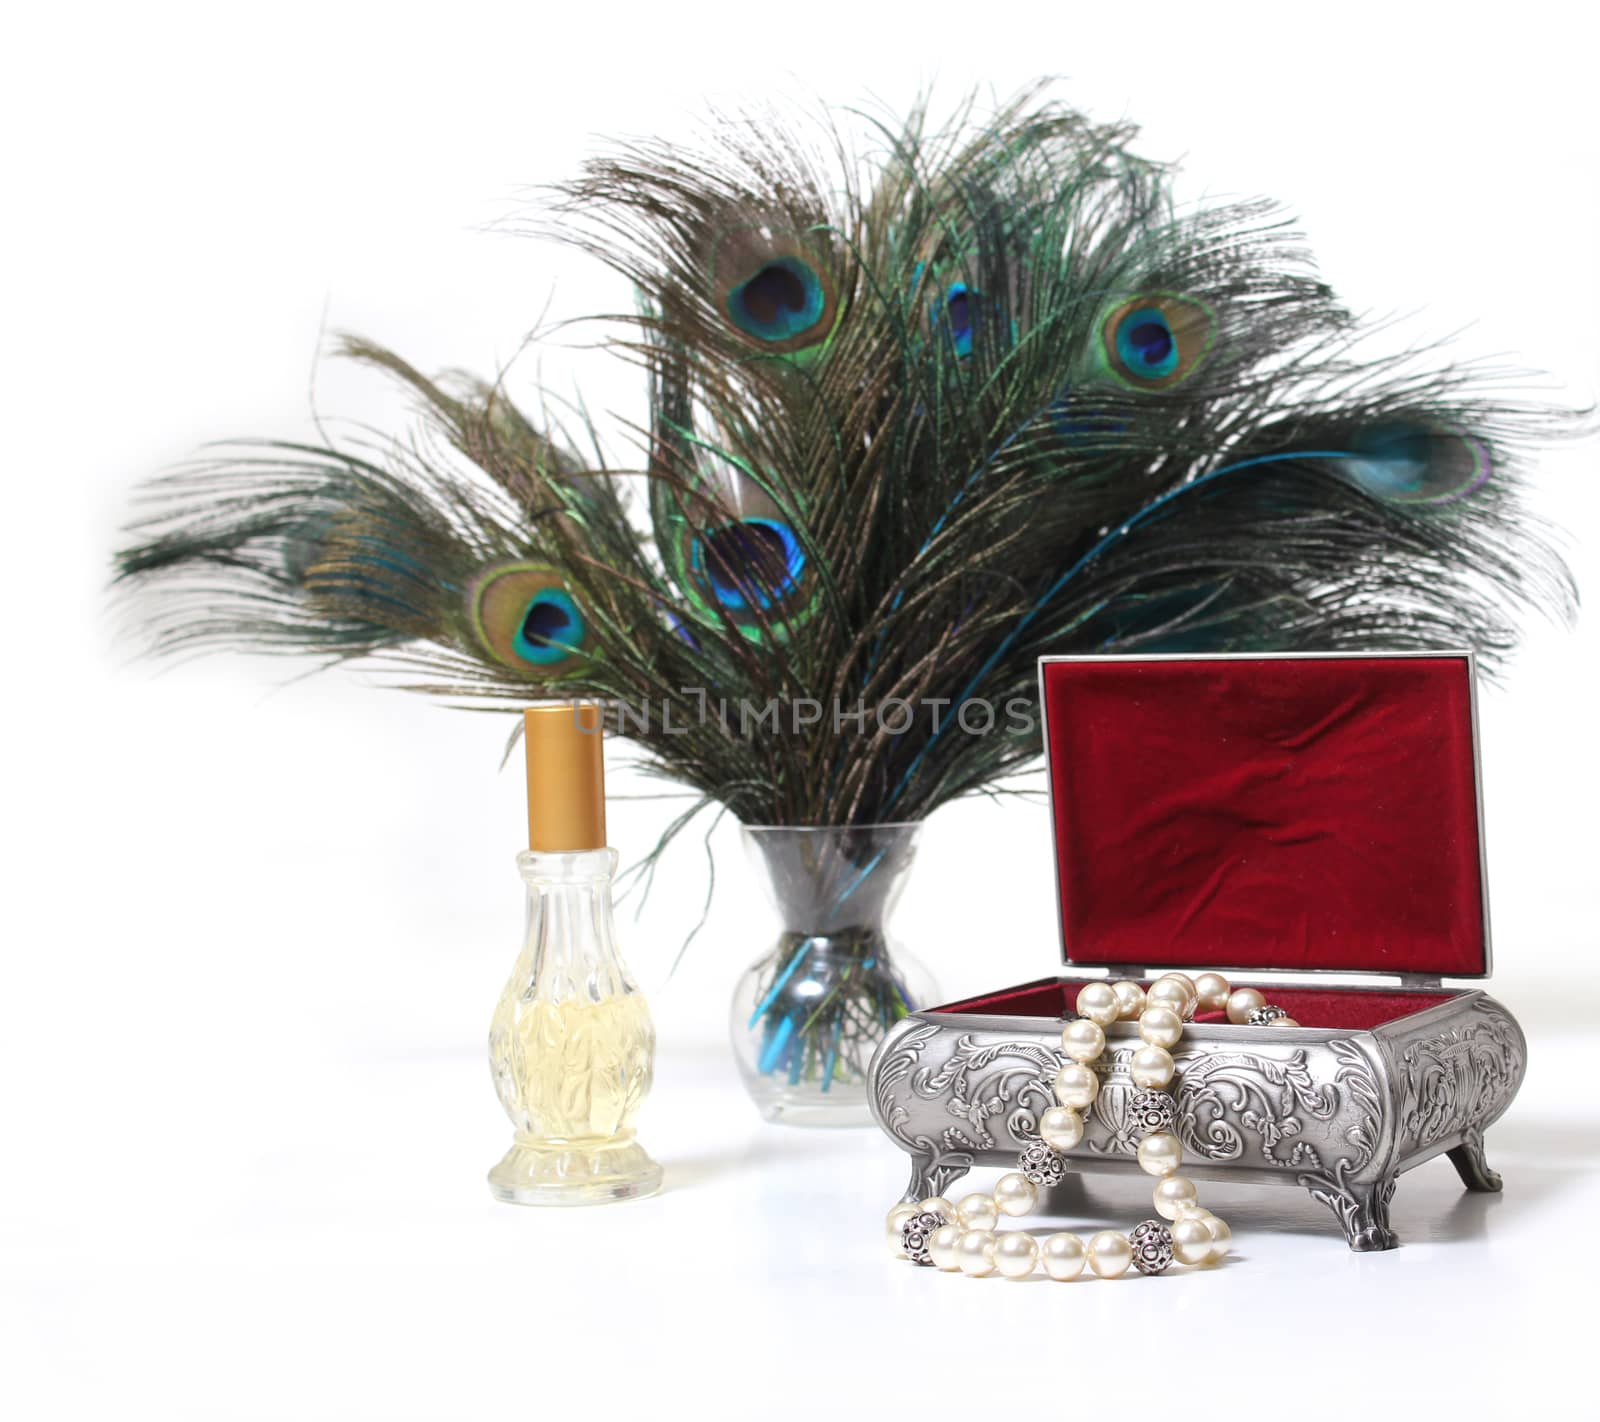 Vintage Jewelry Box and Peacock Feathers by Marti157900